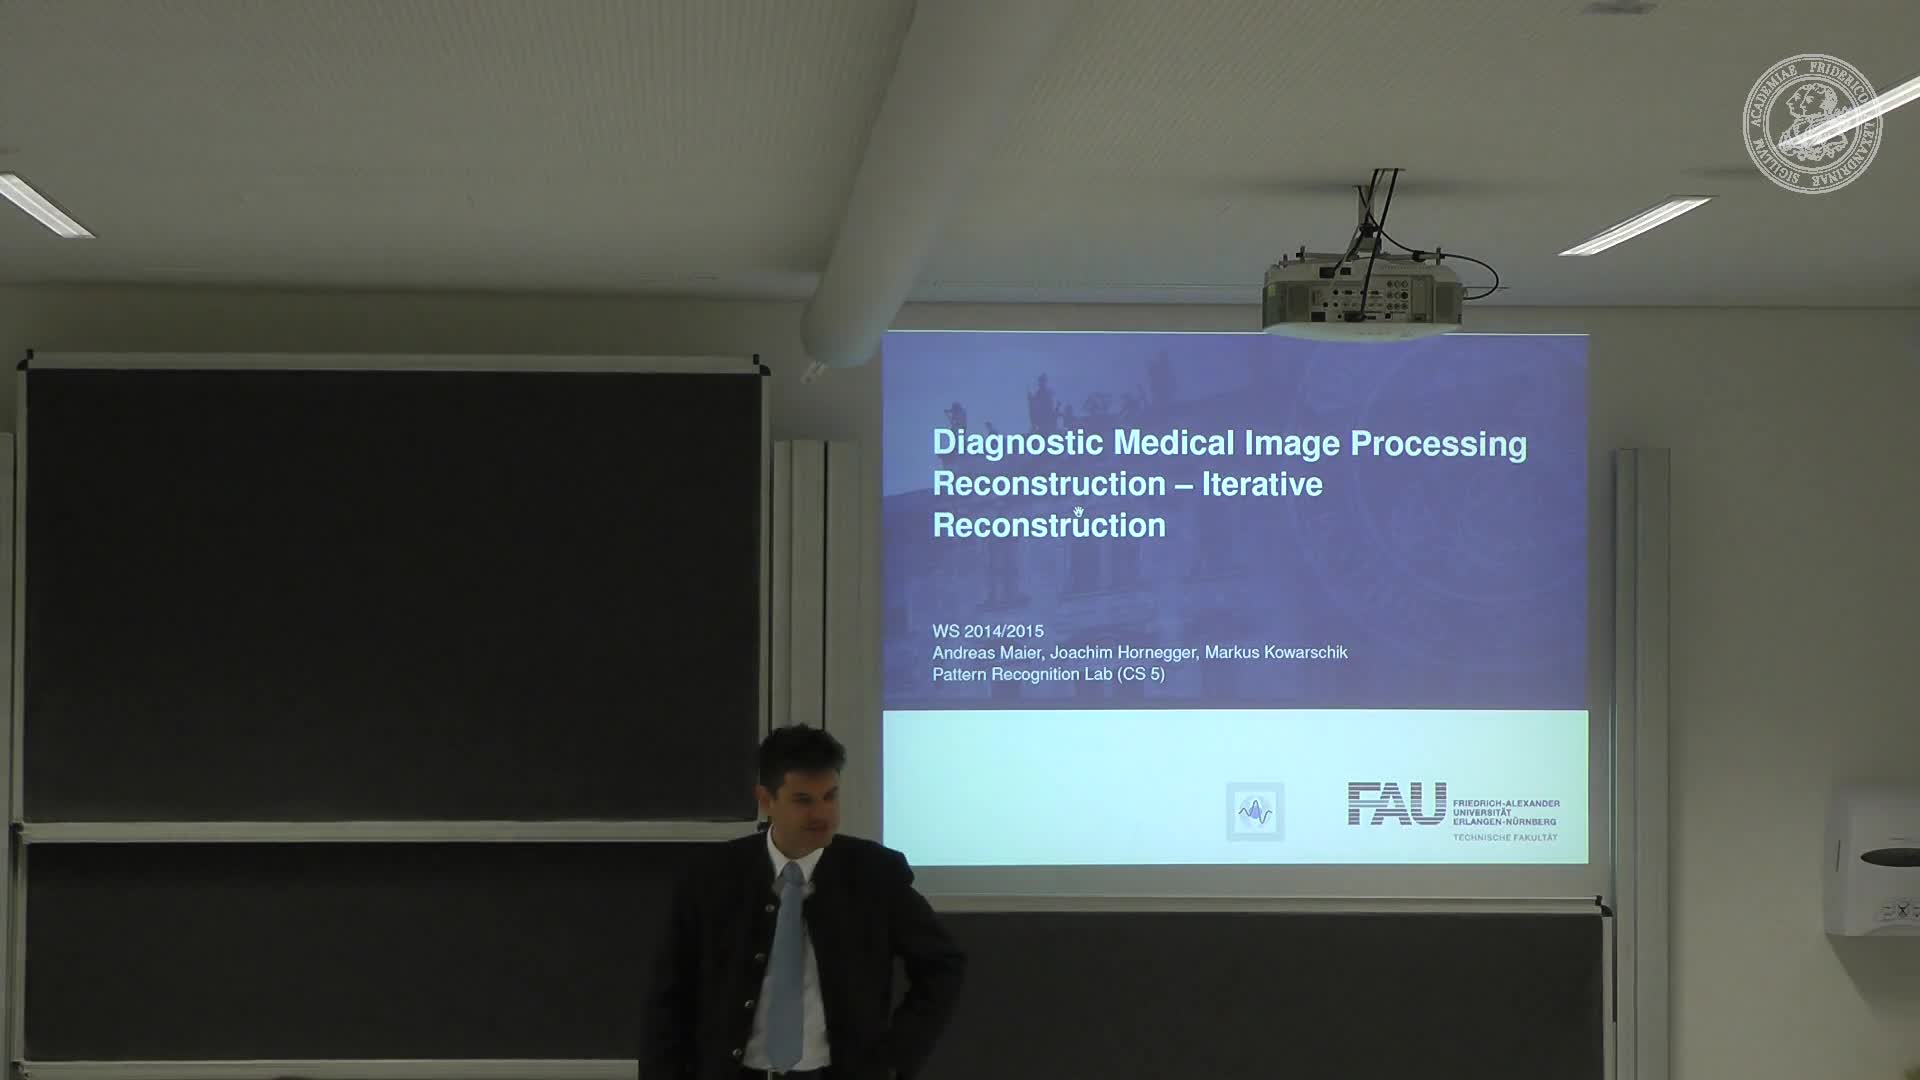 Diagnostic Medical Image Processing preview image